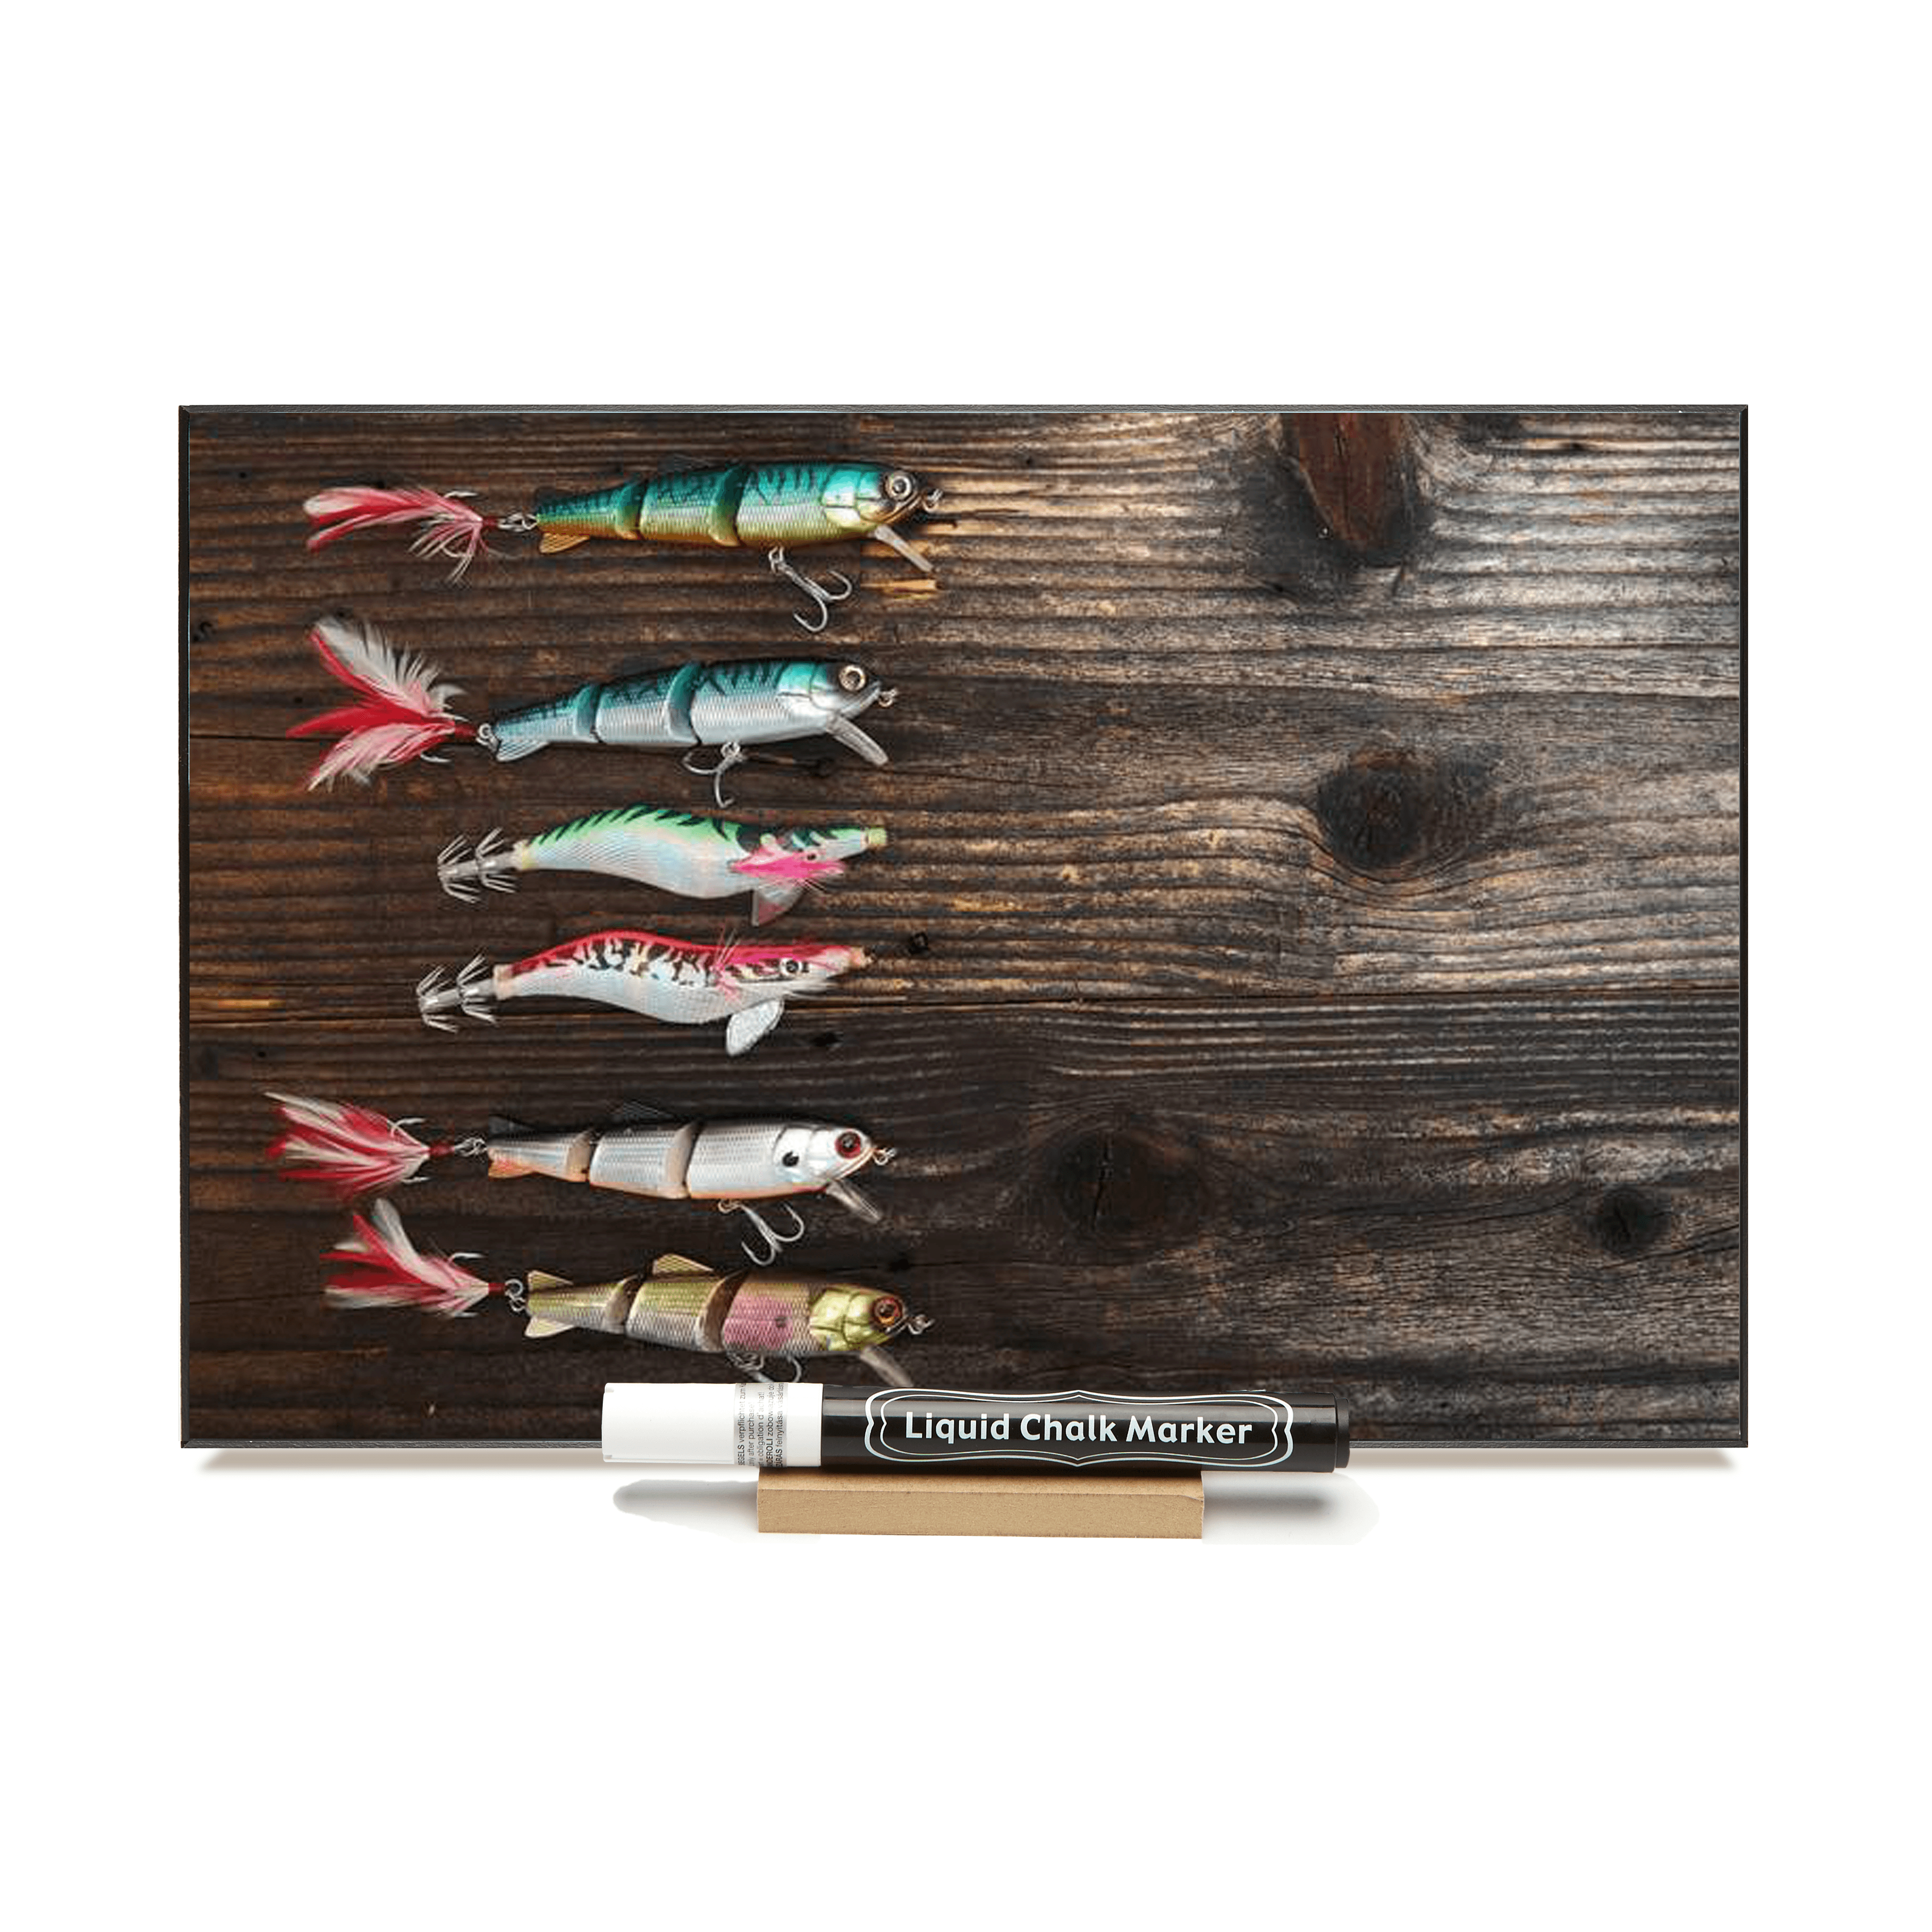 "Fishing Lures" PHOTO CHALKBOARD Includes Chalkboard, Chalk Marker and Stand